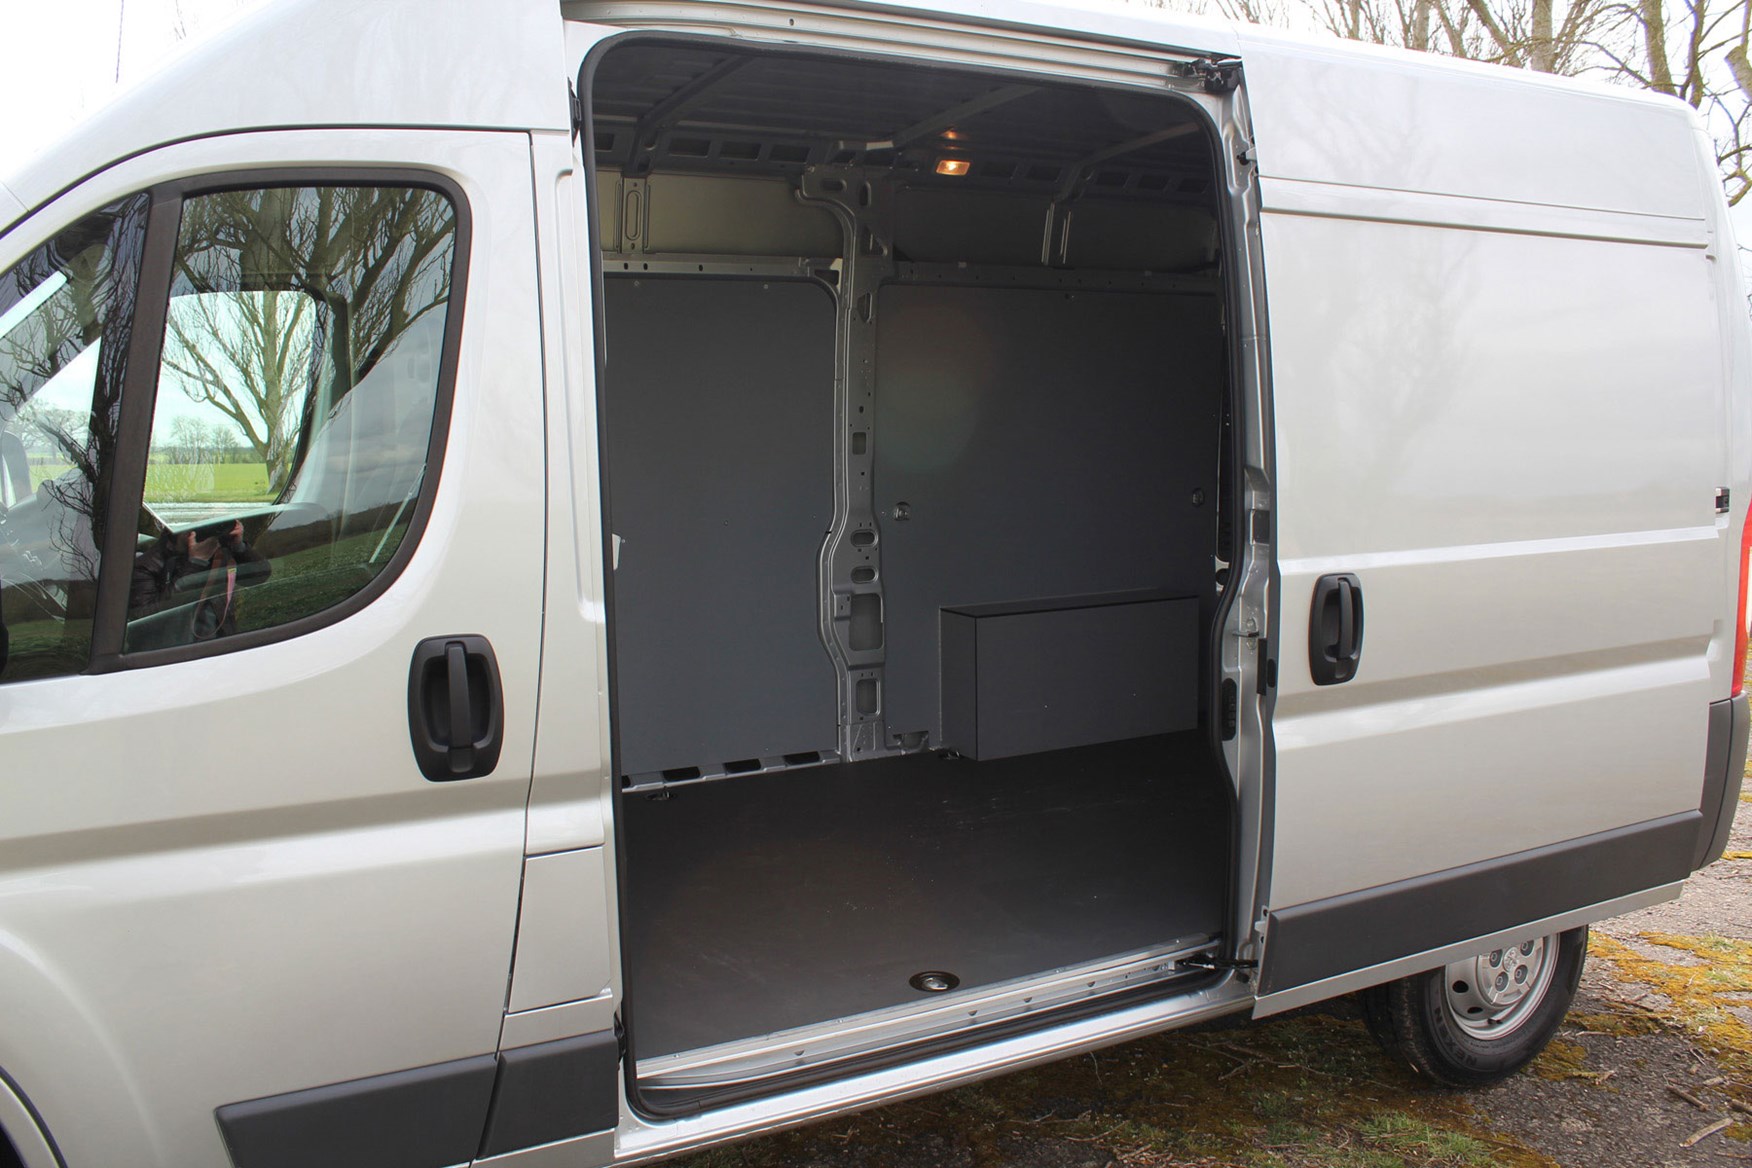 Peugeot Boxer dimensions - load area through side door, lined, silver